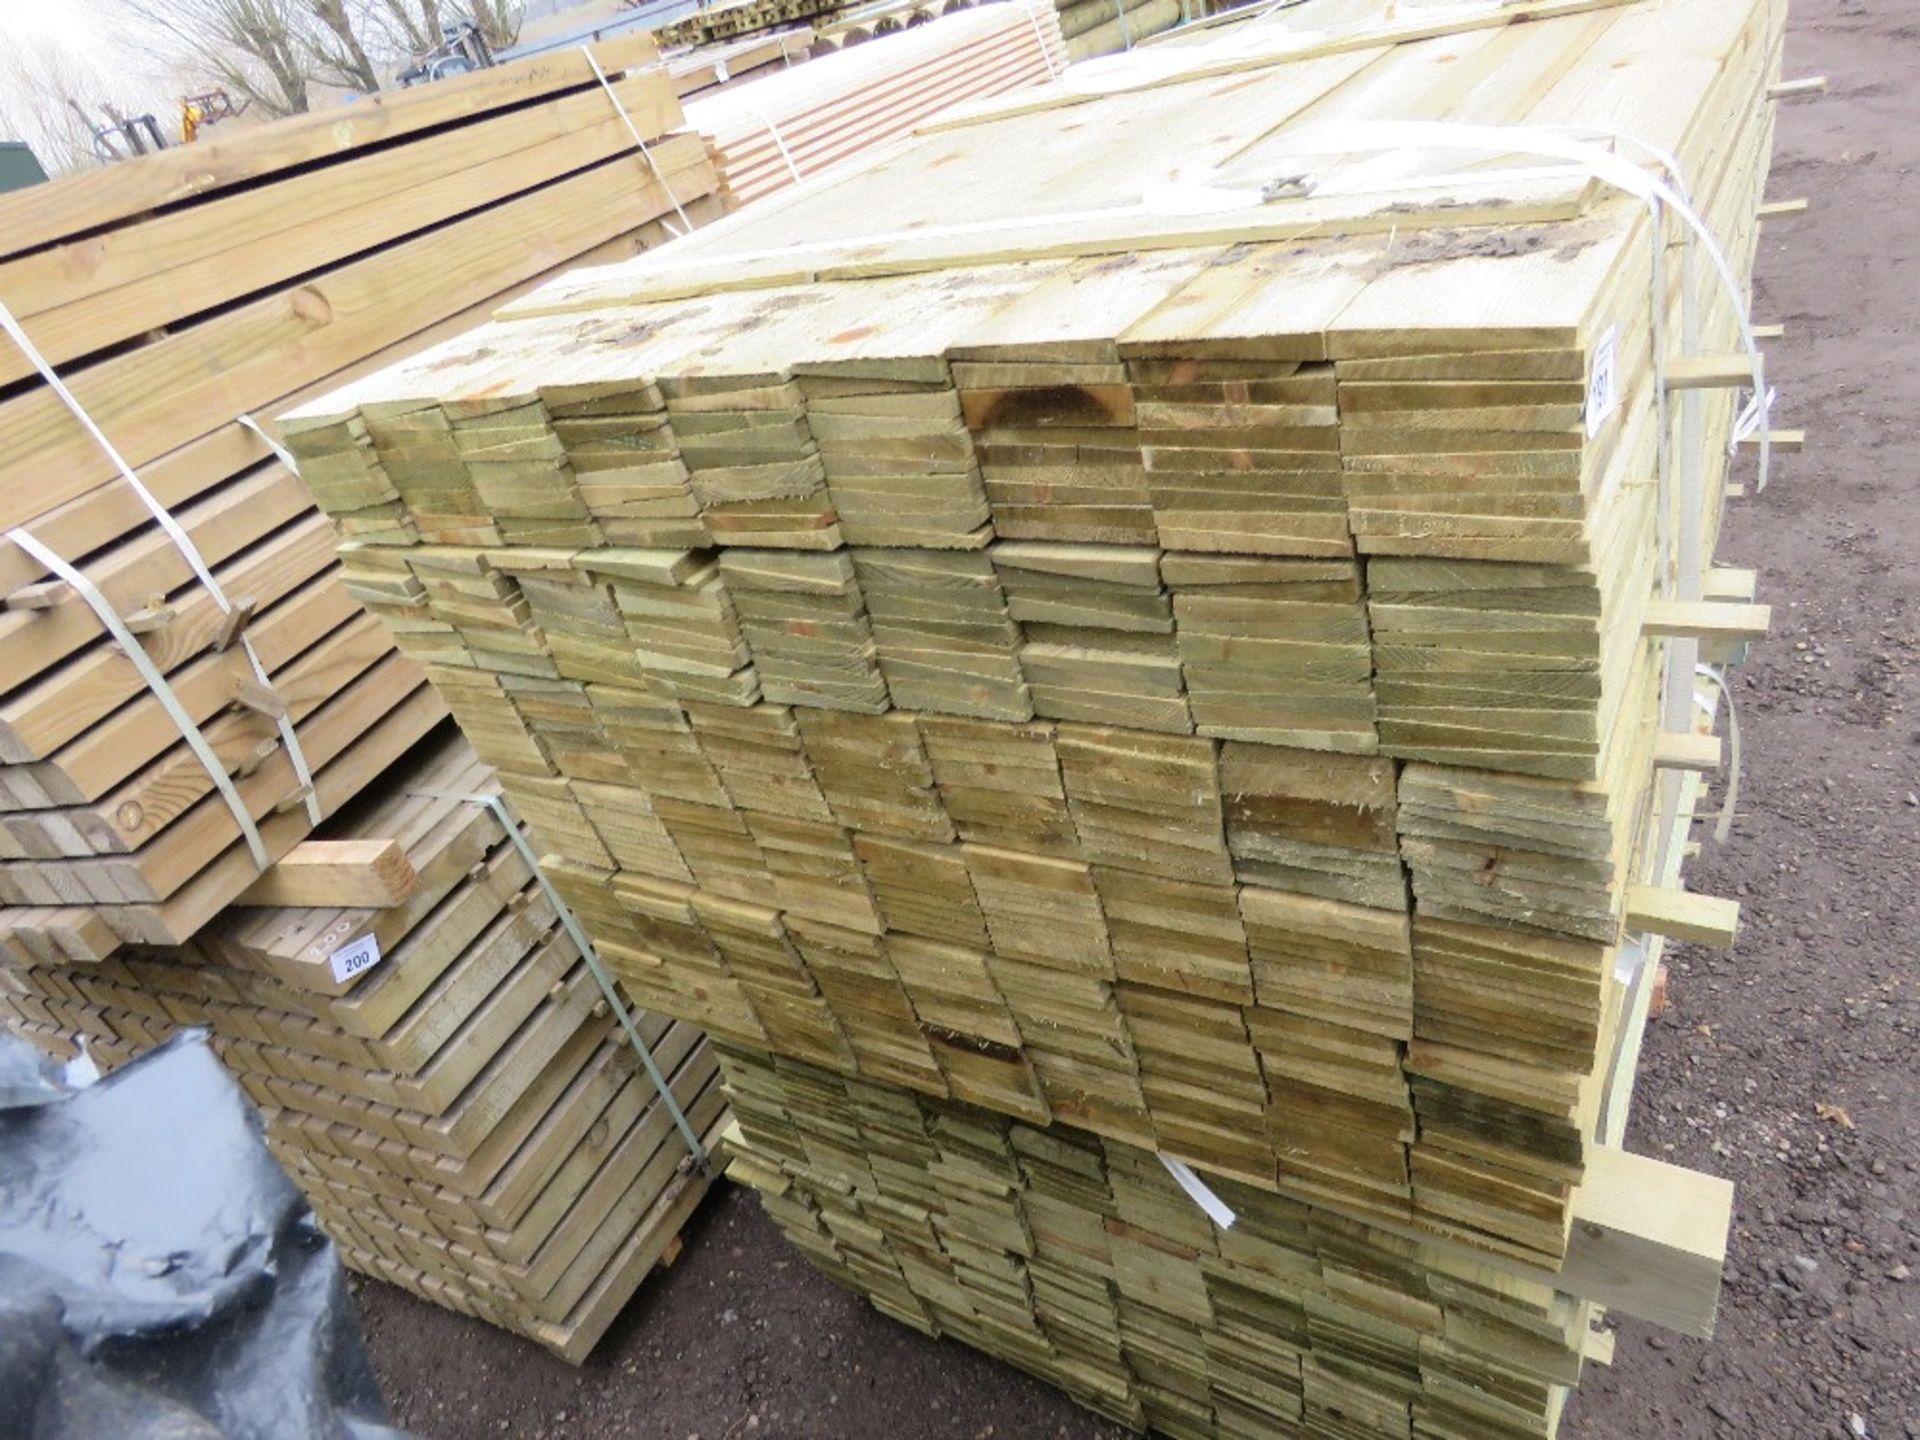 PACK OF PRESSURE TREATED FEATHER EDGE TIMBER CLADDING BOARDS: 1.2M LENGTH X 100MM WIDTH APPROX. - Image 2 of 4